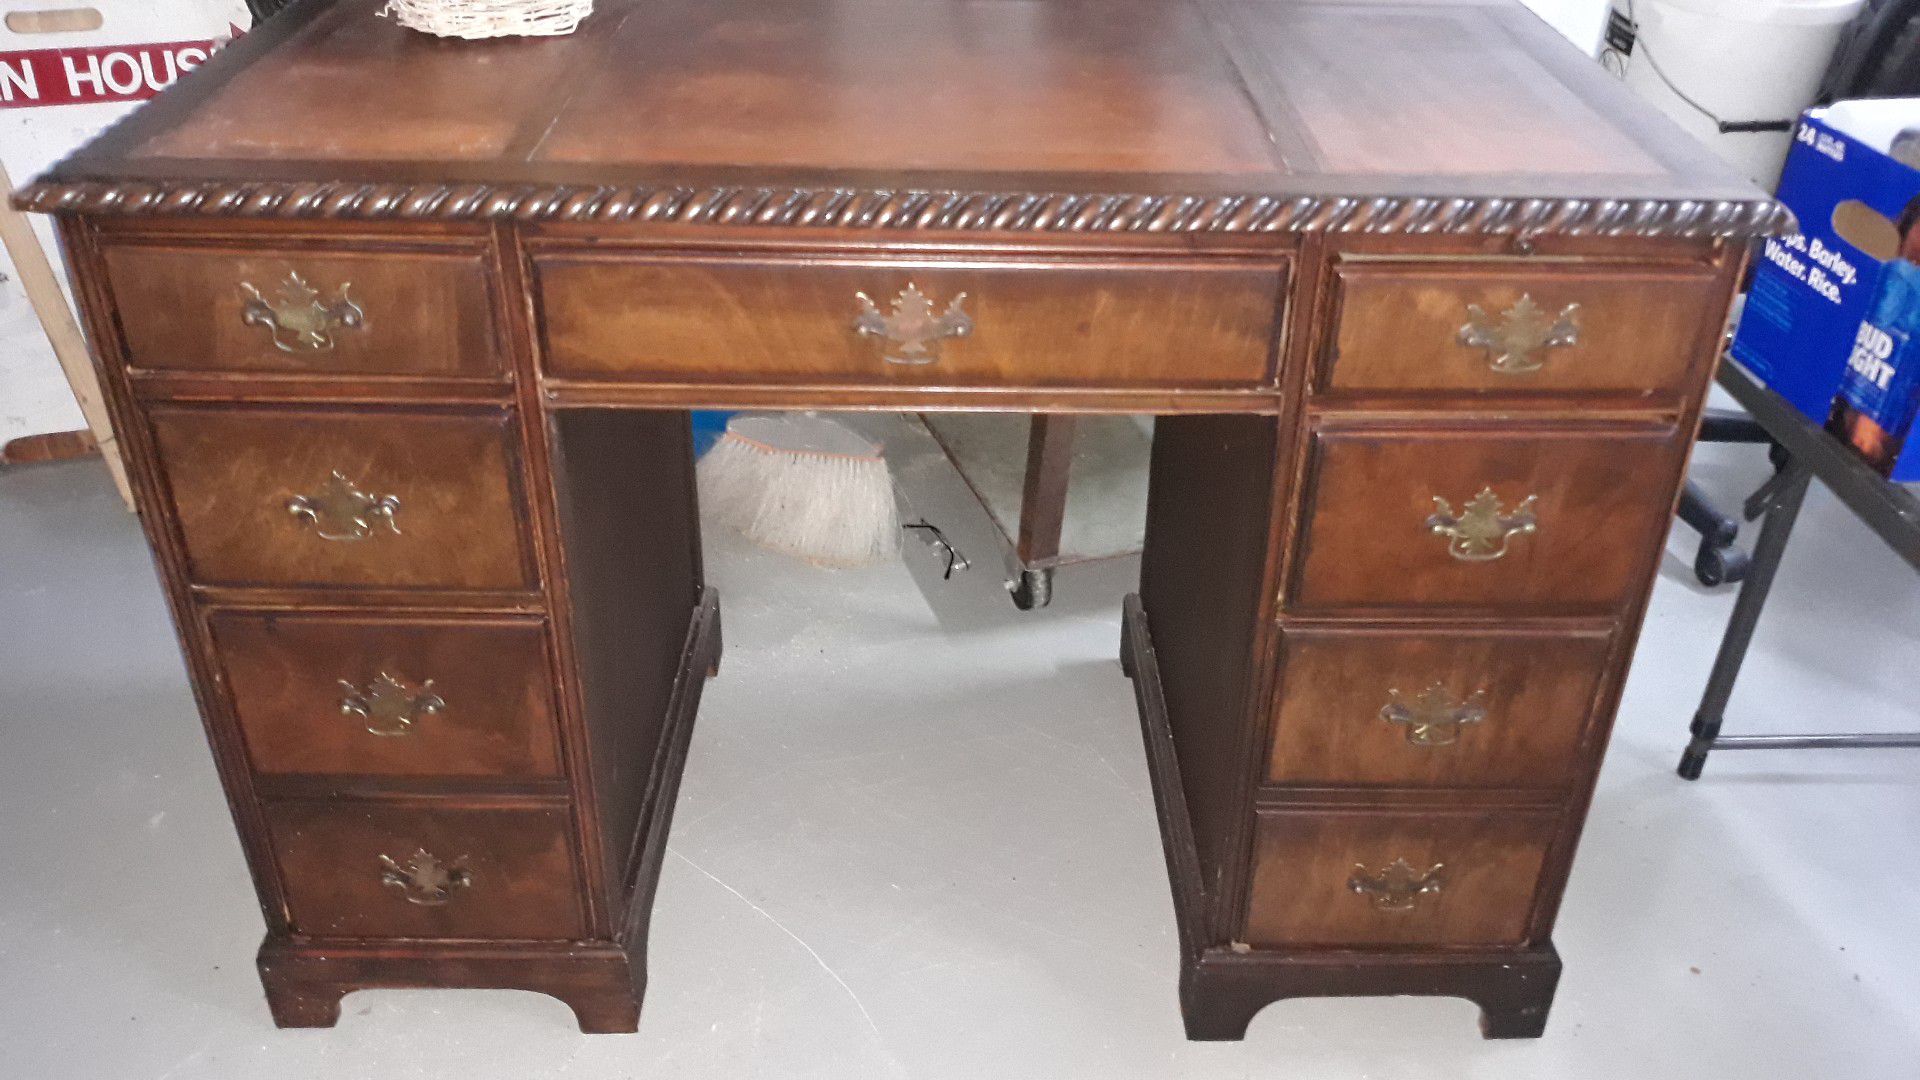 Antique desk with leather inlay top